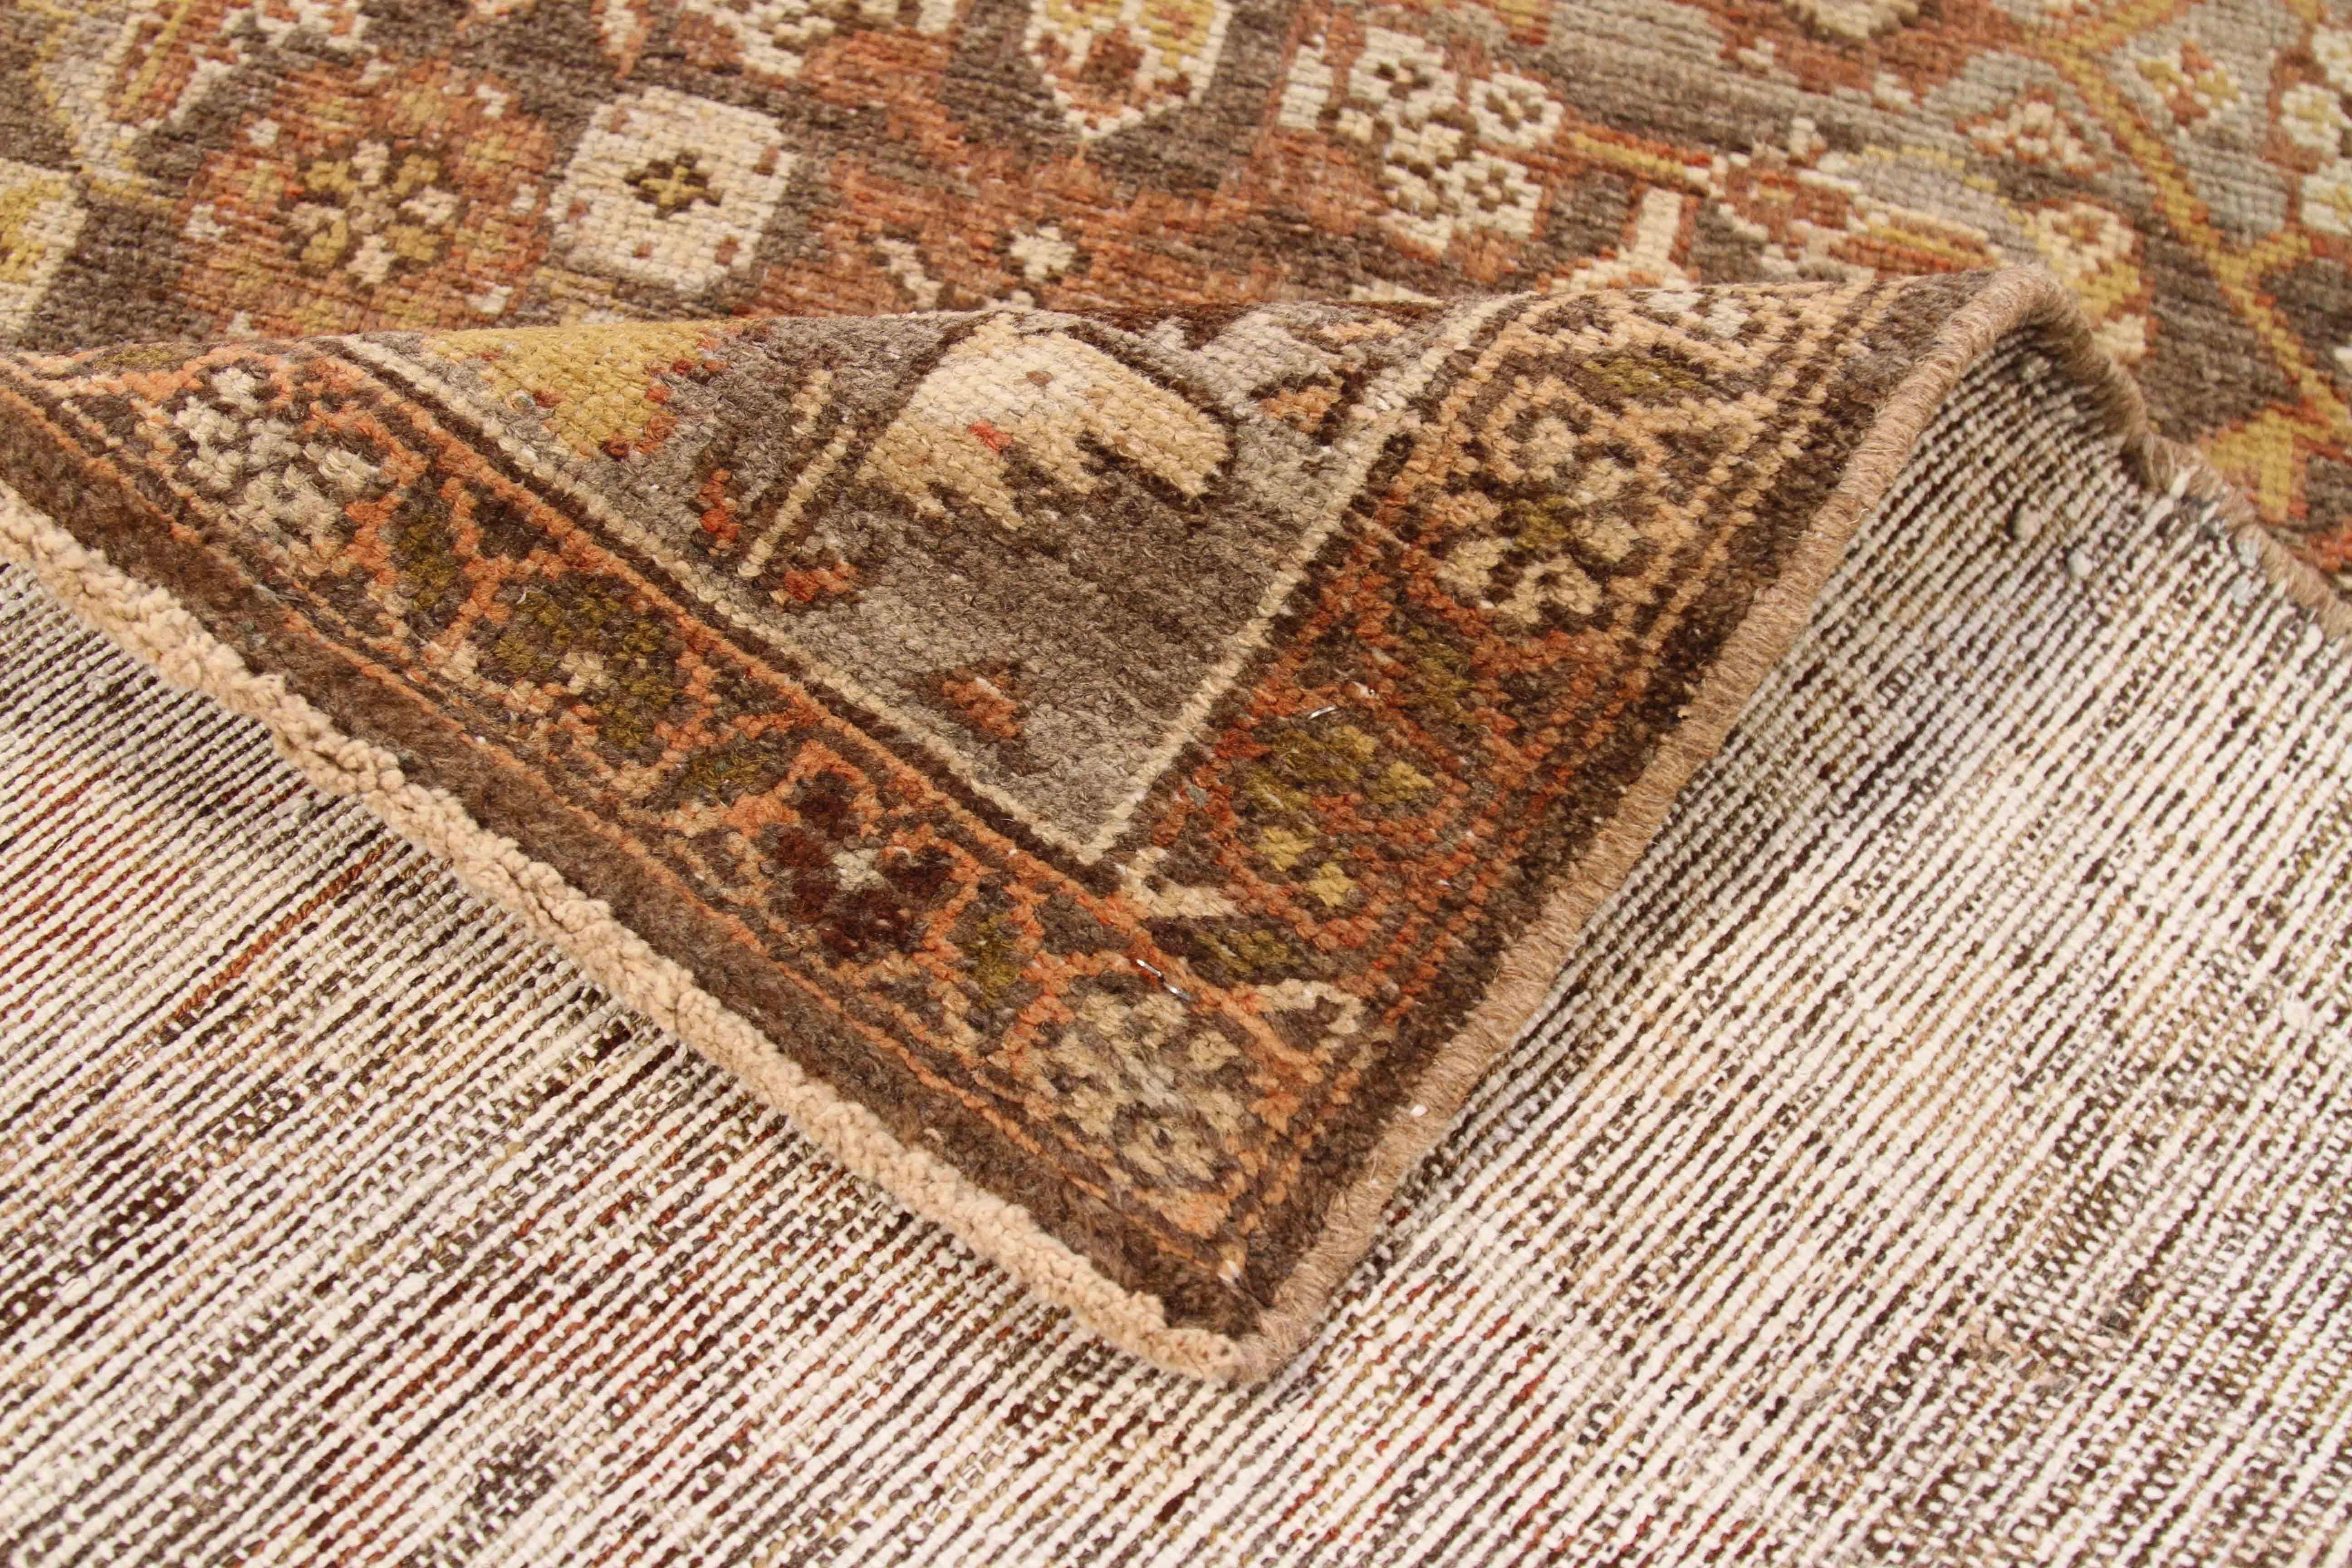 Made from high-quality wool and natural dyes, this antique Persian rug has a rustic feel brought about by its tribal-inspired patterns. It matches well with the chosen color mix of brown, beige, red and yellow. This piece will look stunning in a